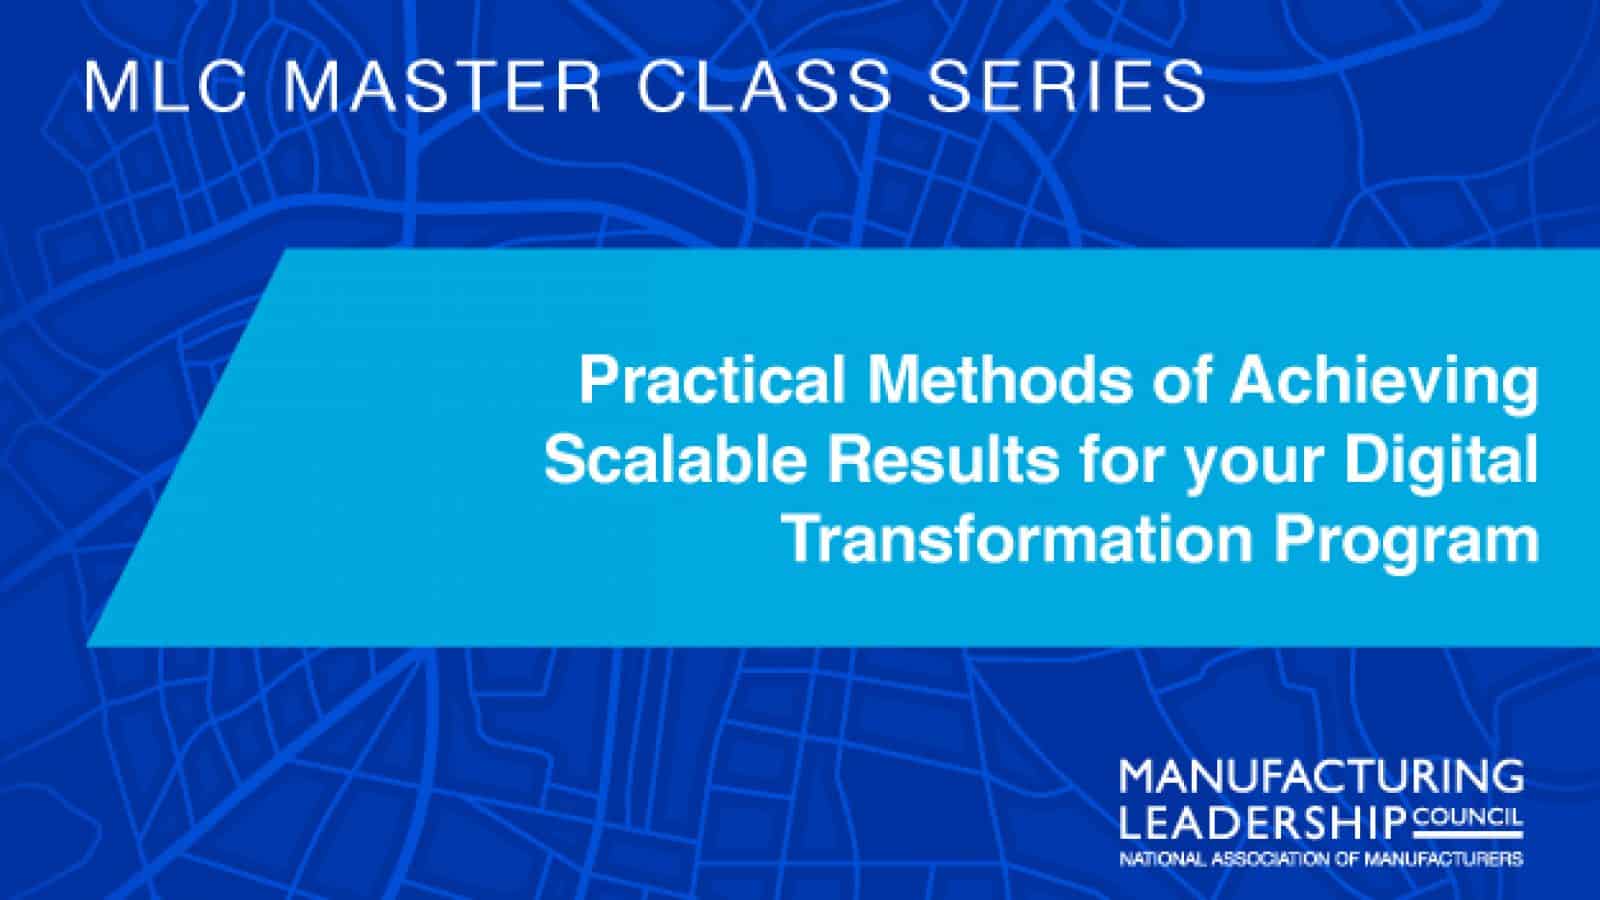 Practical Methods of Achieving Scalable Results for your Digital Transformation Program